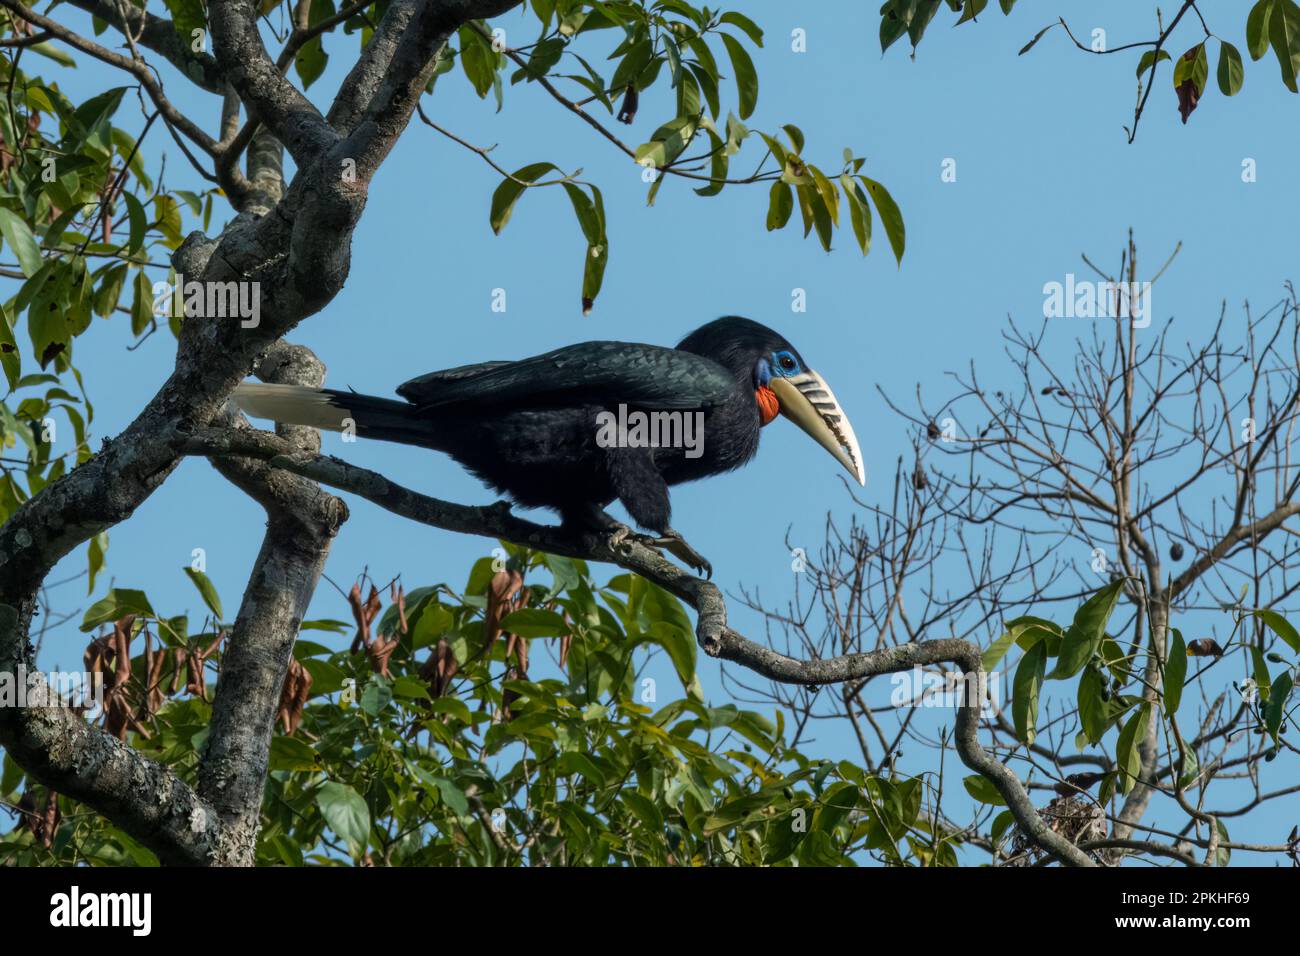 A female rufous-necked hornbill (Aceros nipalensis) observed in Latpanchar in West Bengal, India Stock Photo